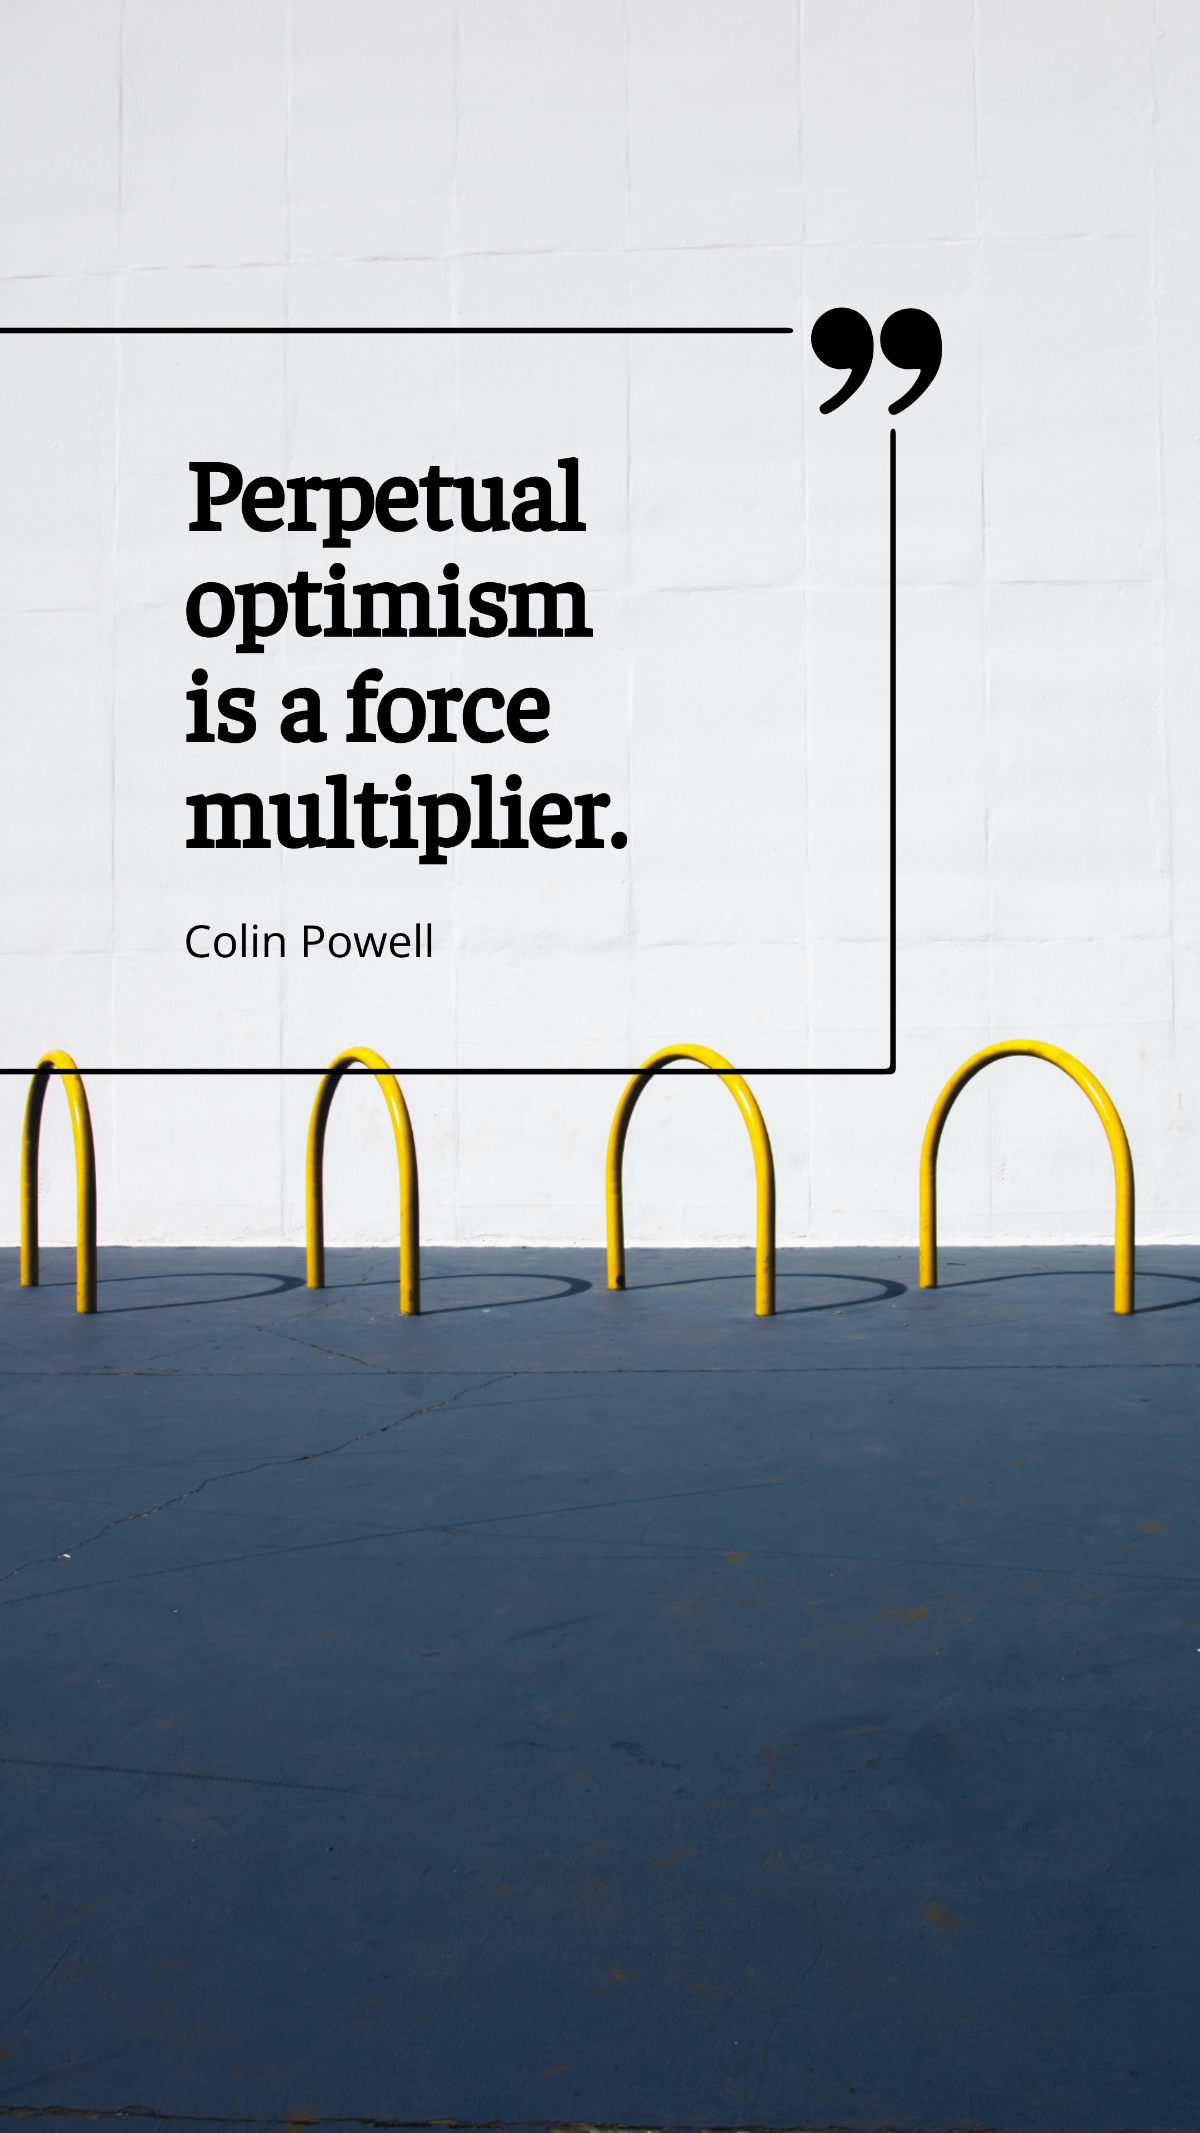 Colin Powell - Perpetual optimism is a force multiplier. Template